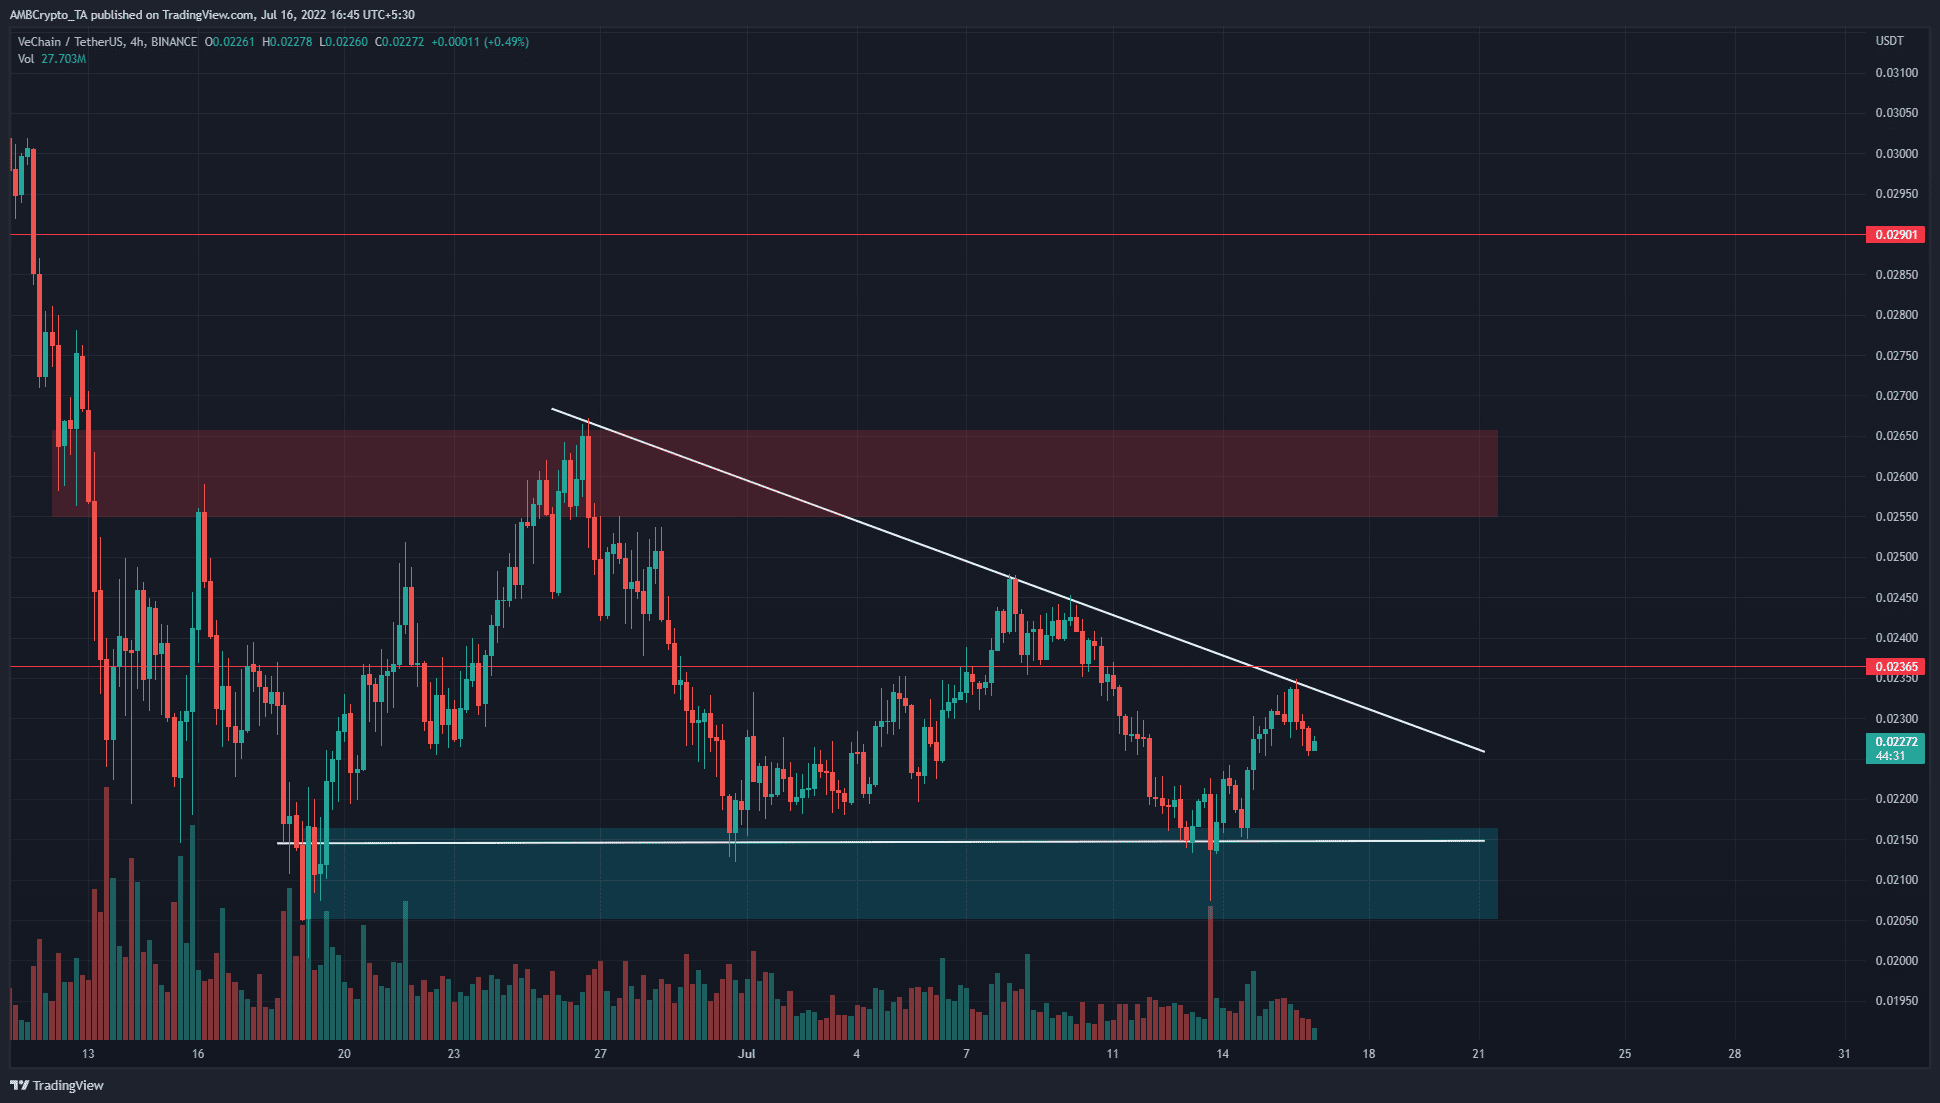 VeChain threatens a break down with bearish pattern, here are the levels to watch out for